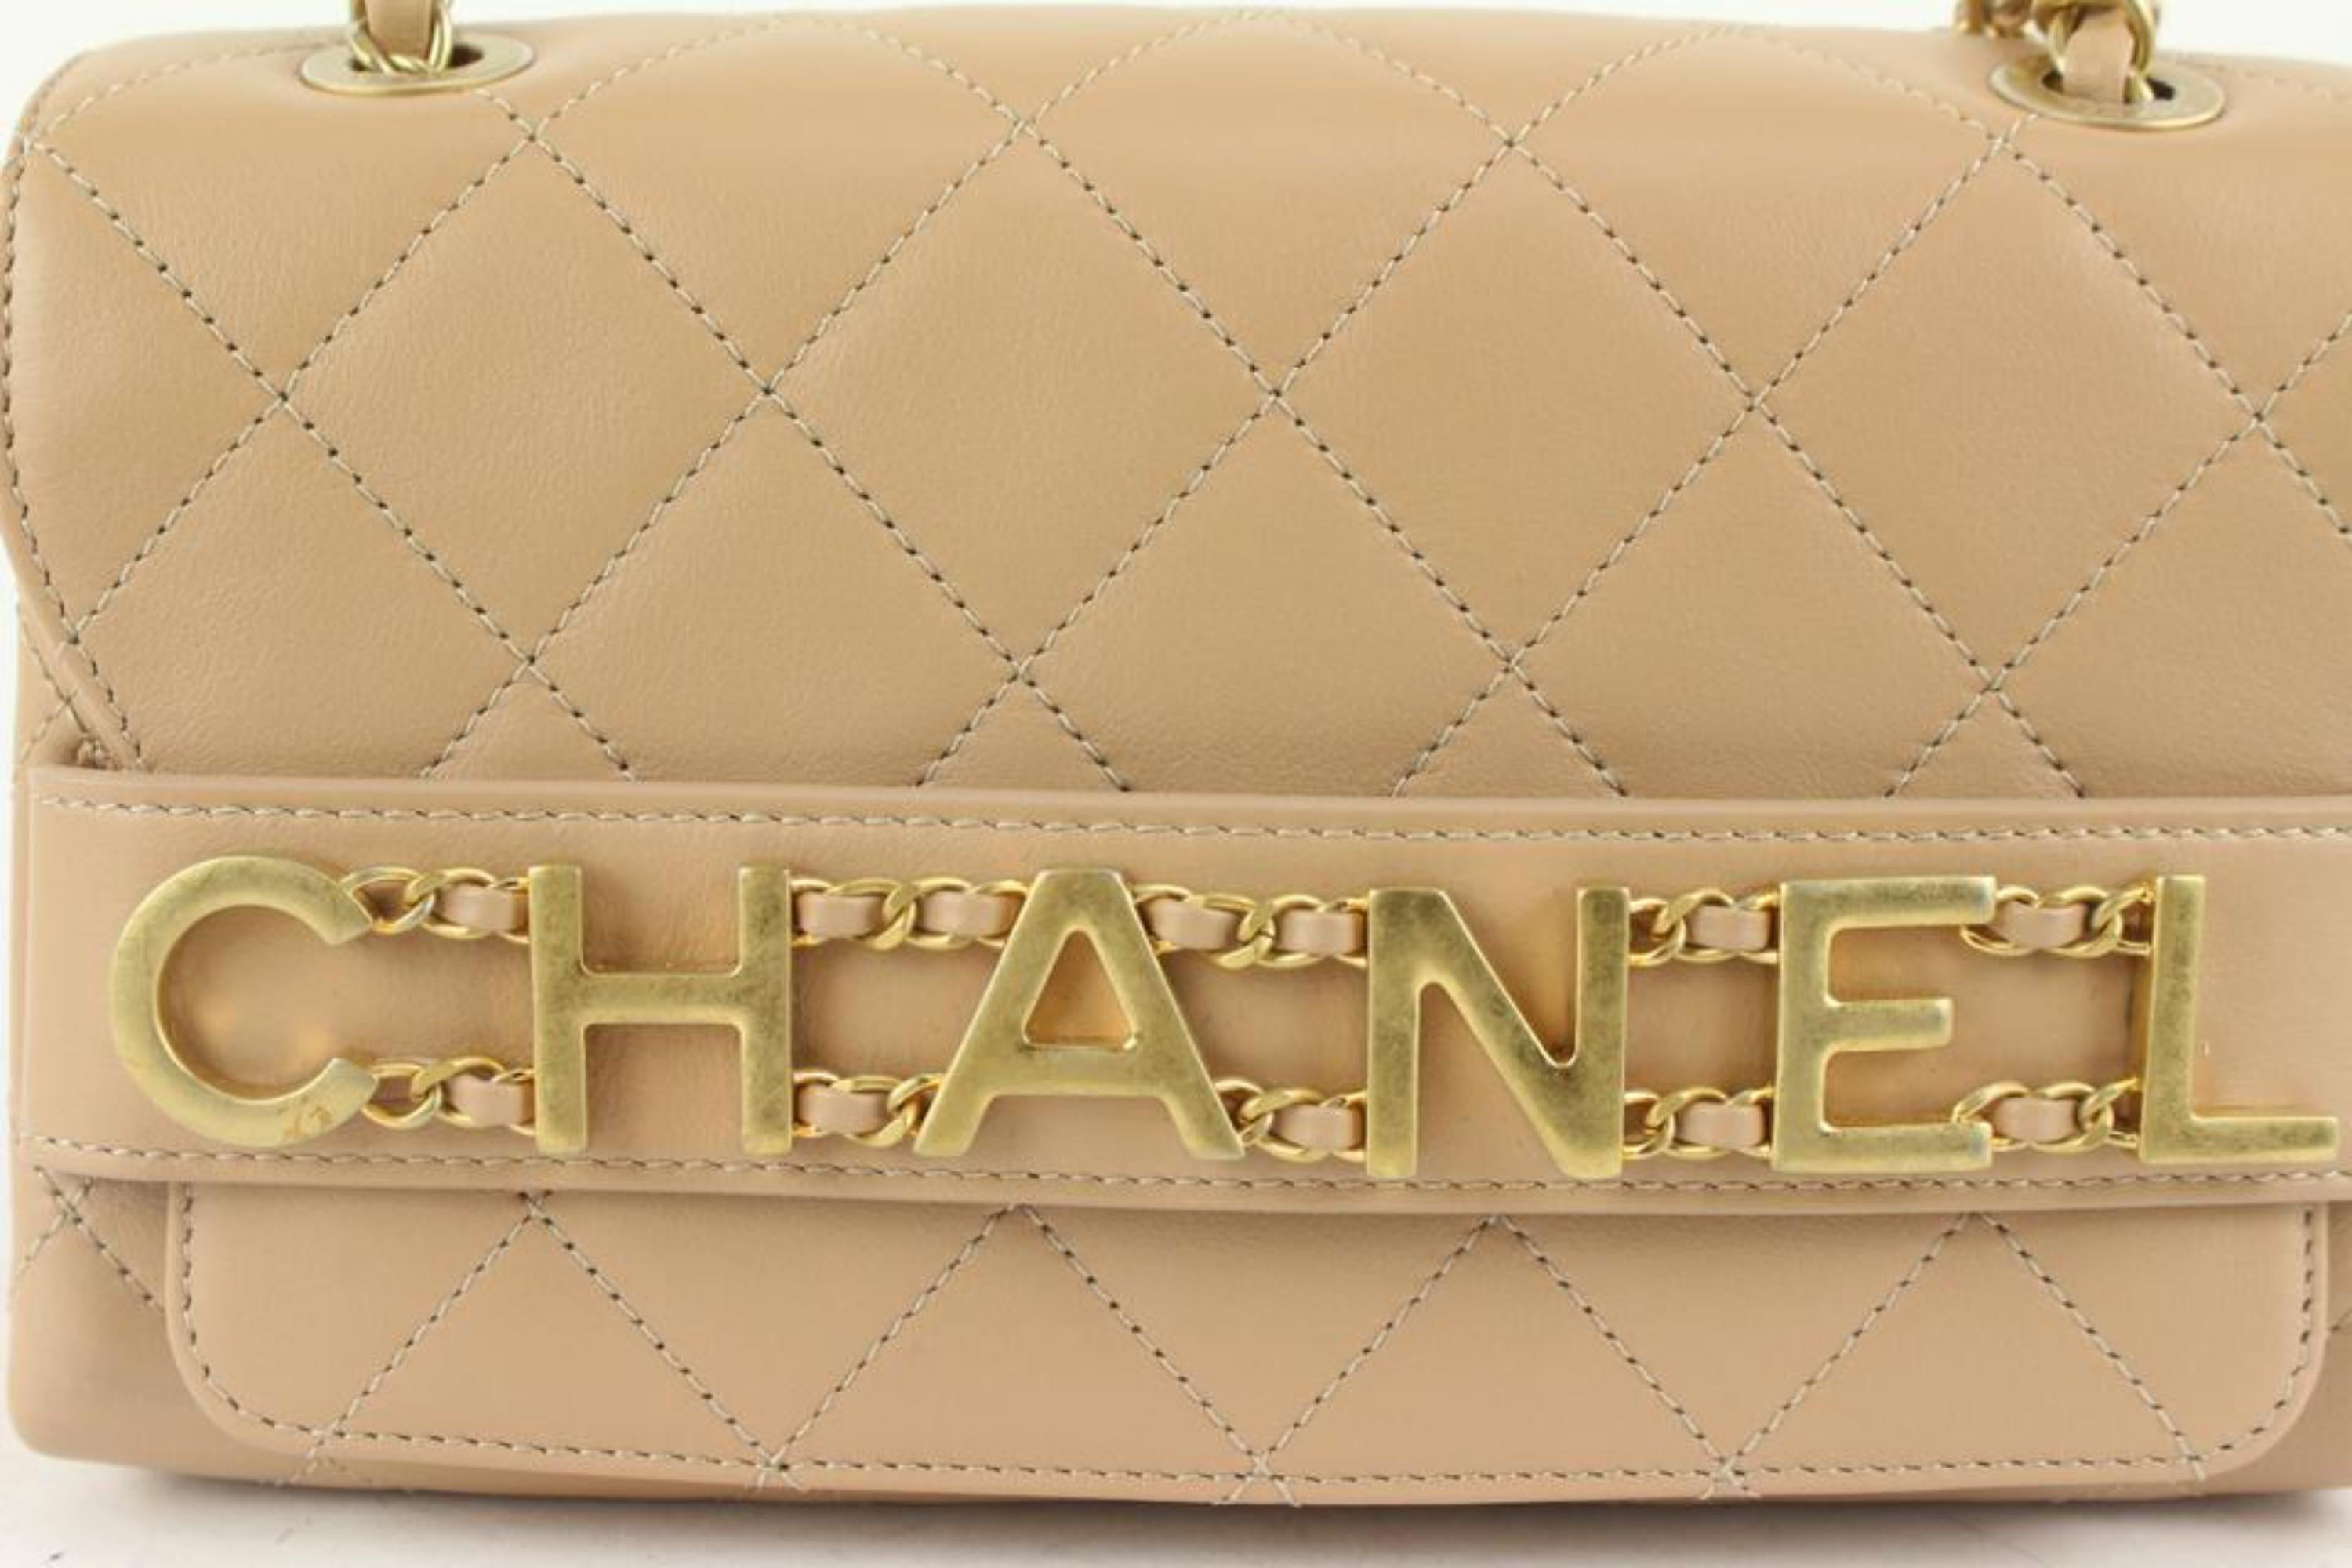 Chanel Quilted Beige Leather Enchained Top Handle Crossbody Flap Bag 1111C27 For Sale 6